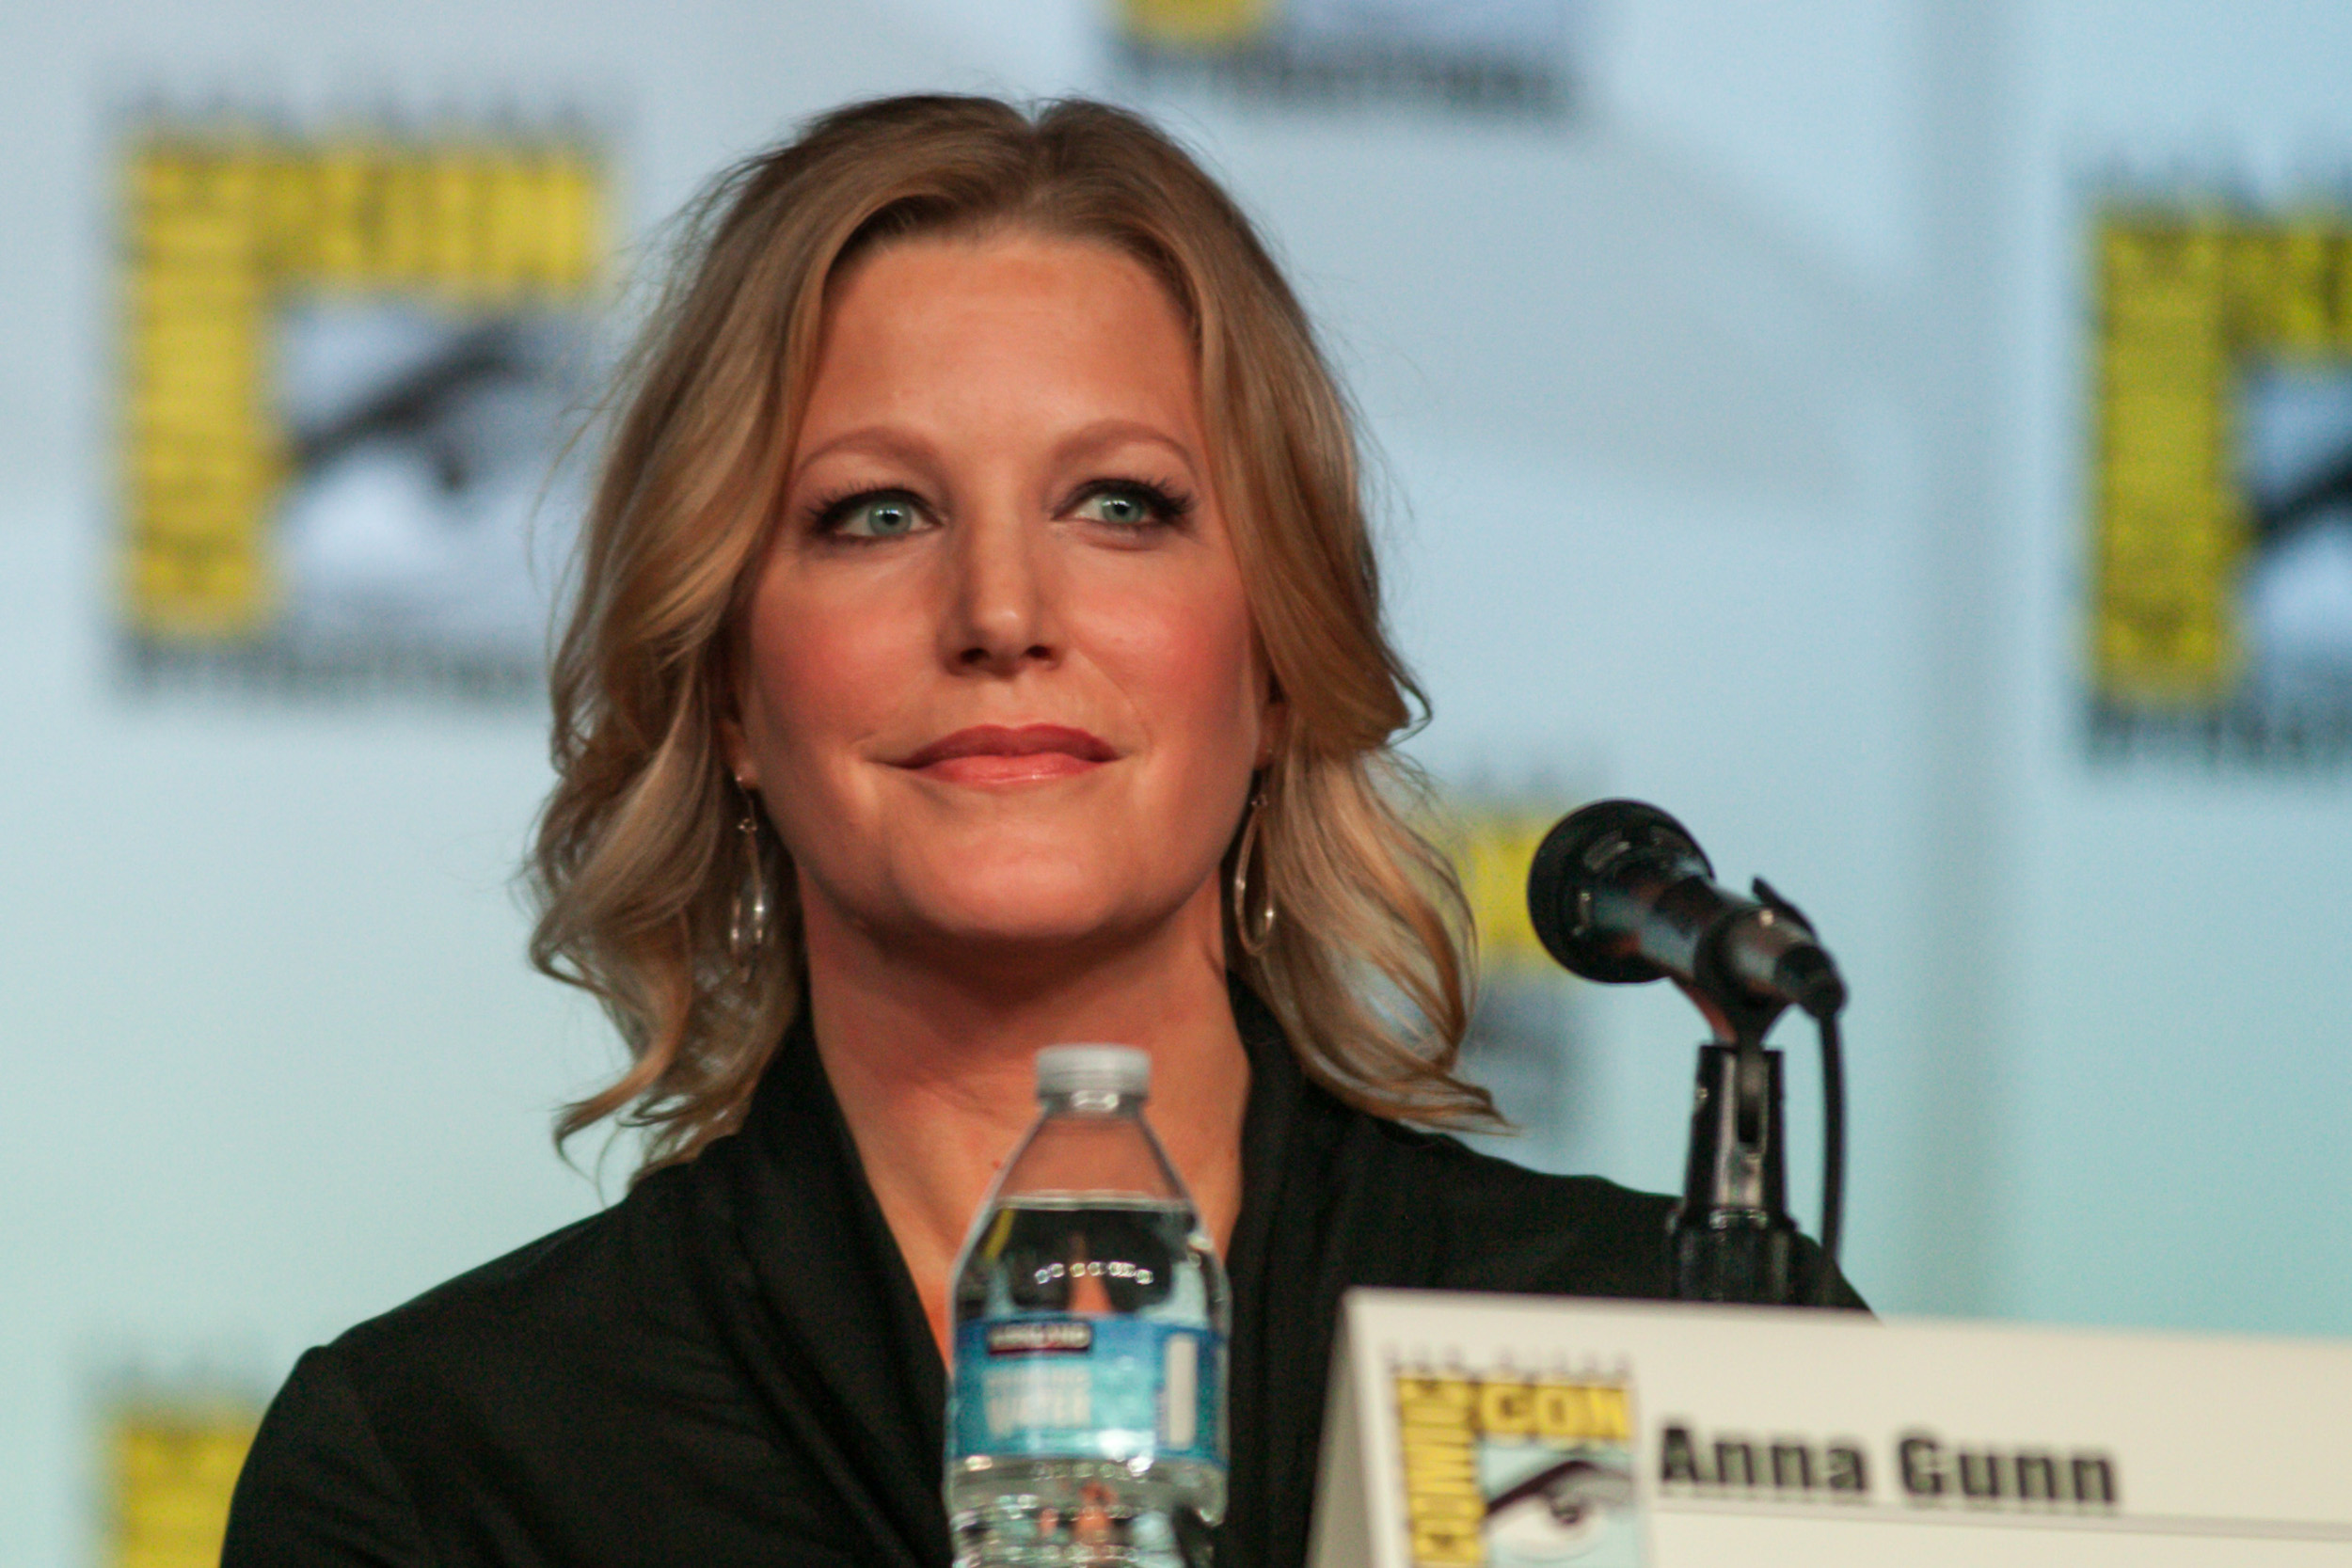 Anna Gunn sitting in front of a microphone during a Comic-Con panel